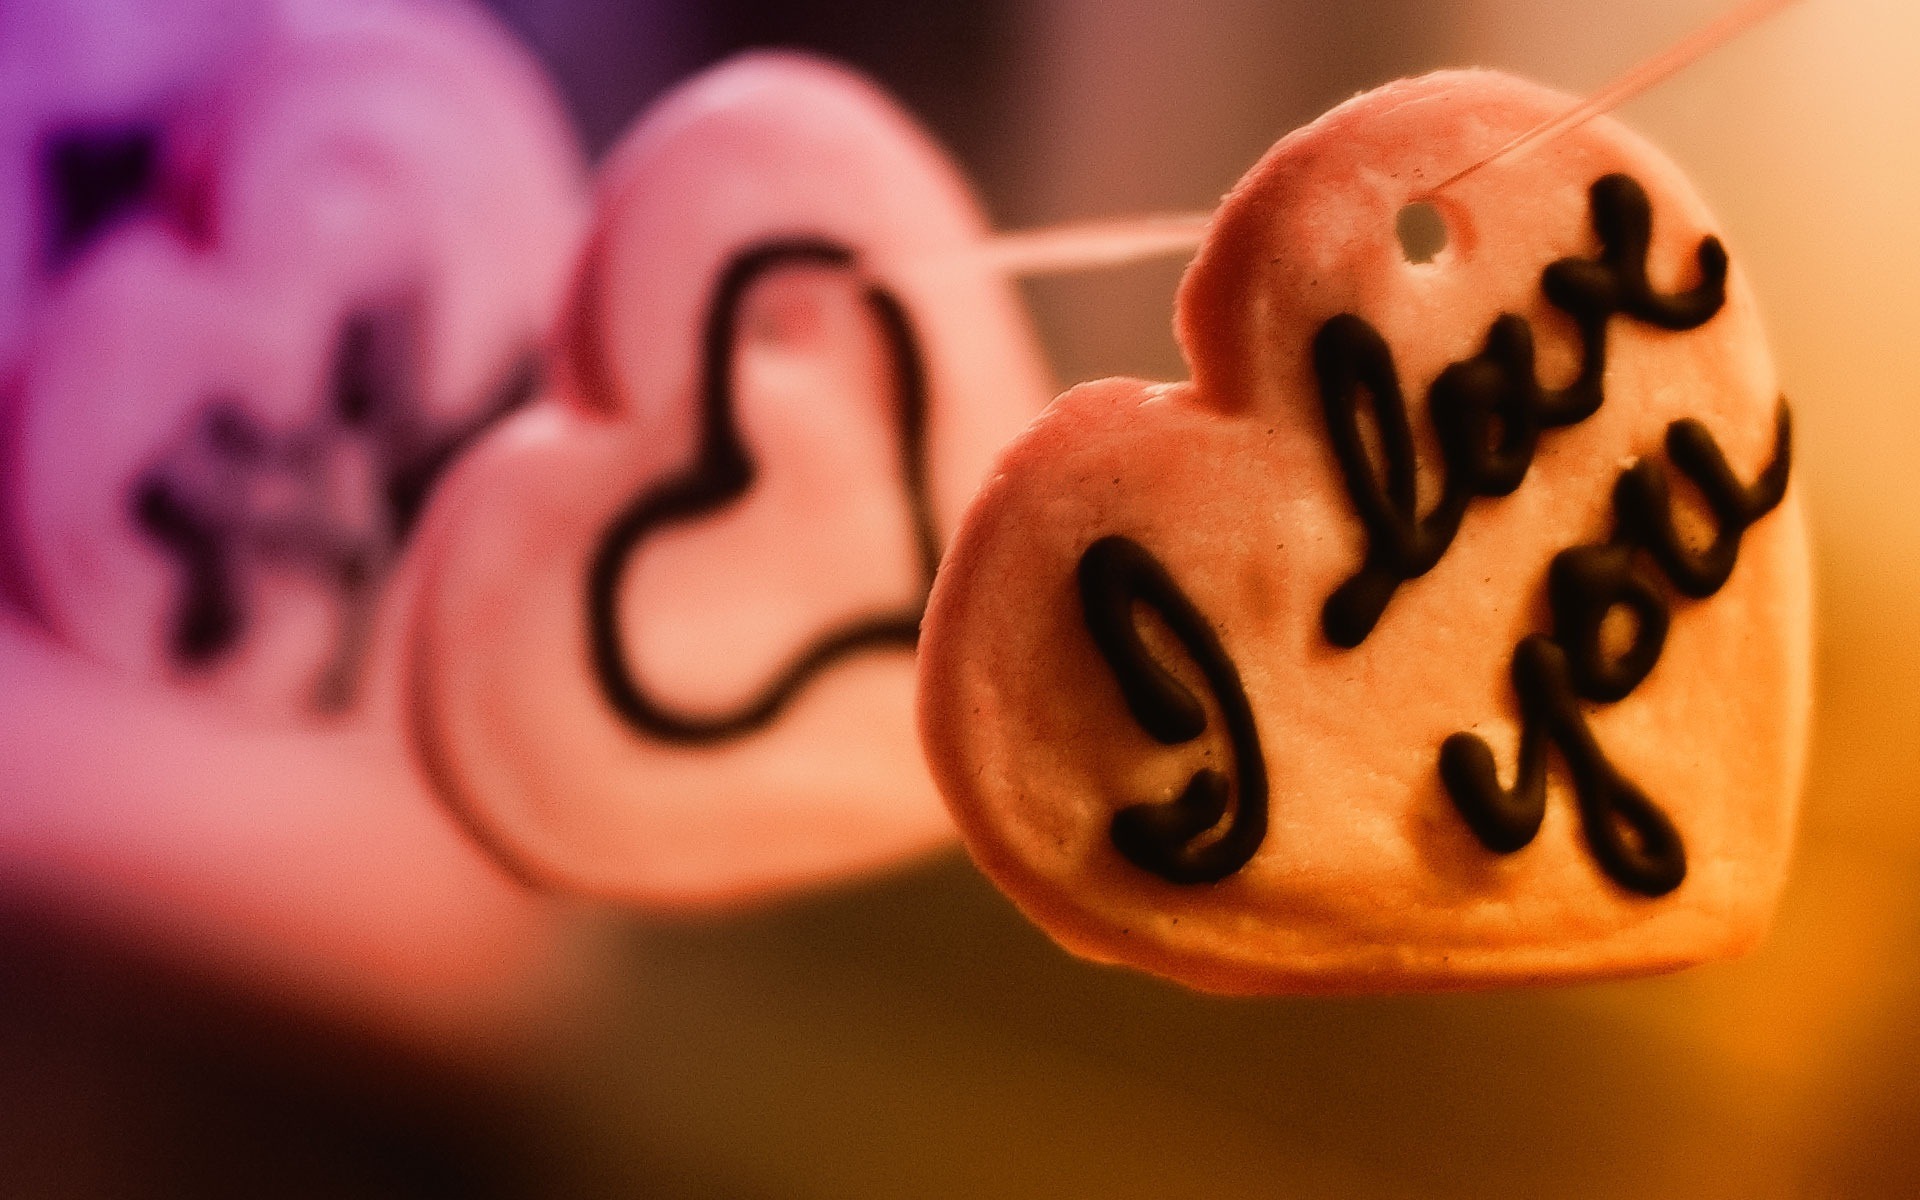 Warm and romantic Valentine's Day HD wallpapers #4 - 1920x1200